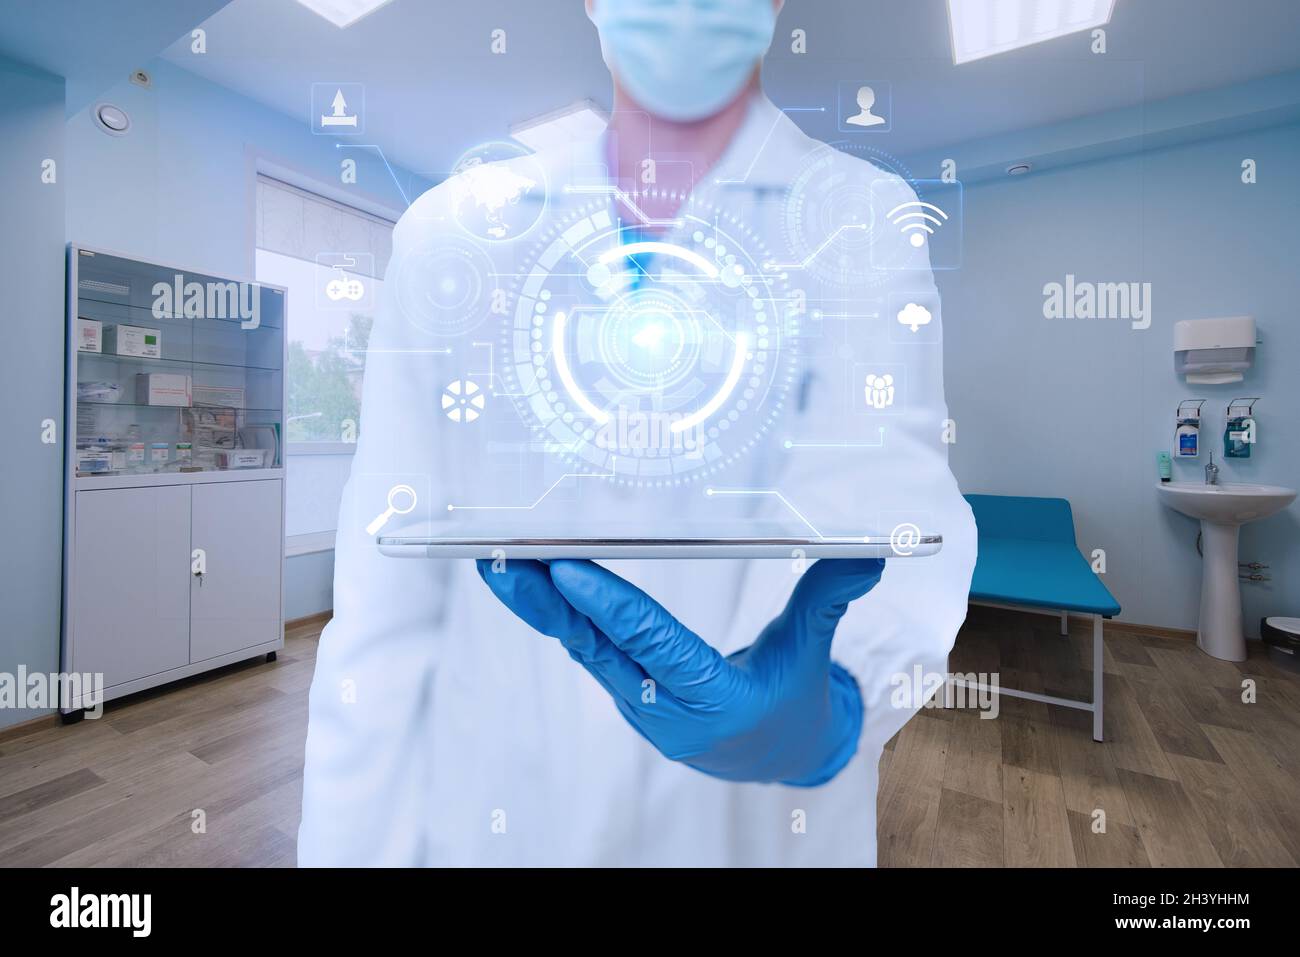 Doctor In The Laboratory Wearing Gloves Holding A Tablet Showing Futuristic Technology. Scientist Inside Workshop Using Tab Pres Stock Photo